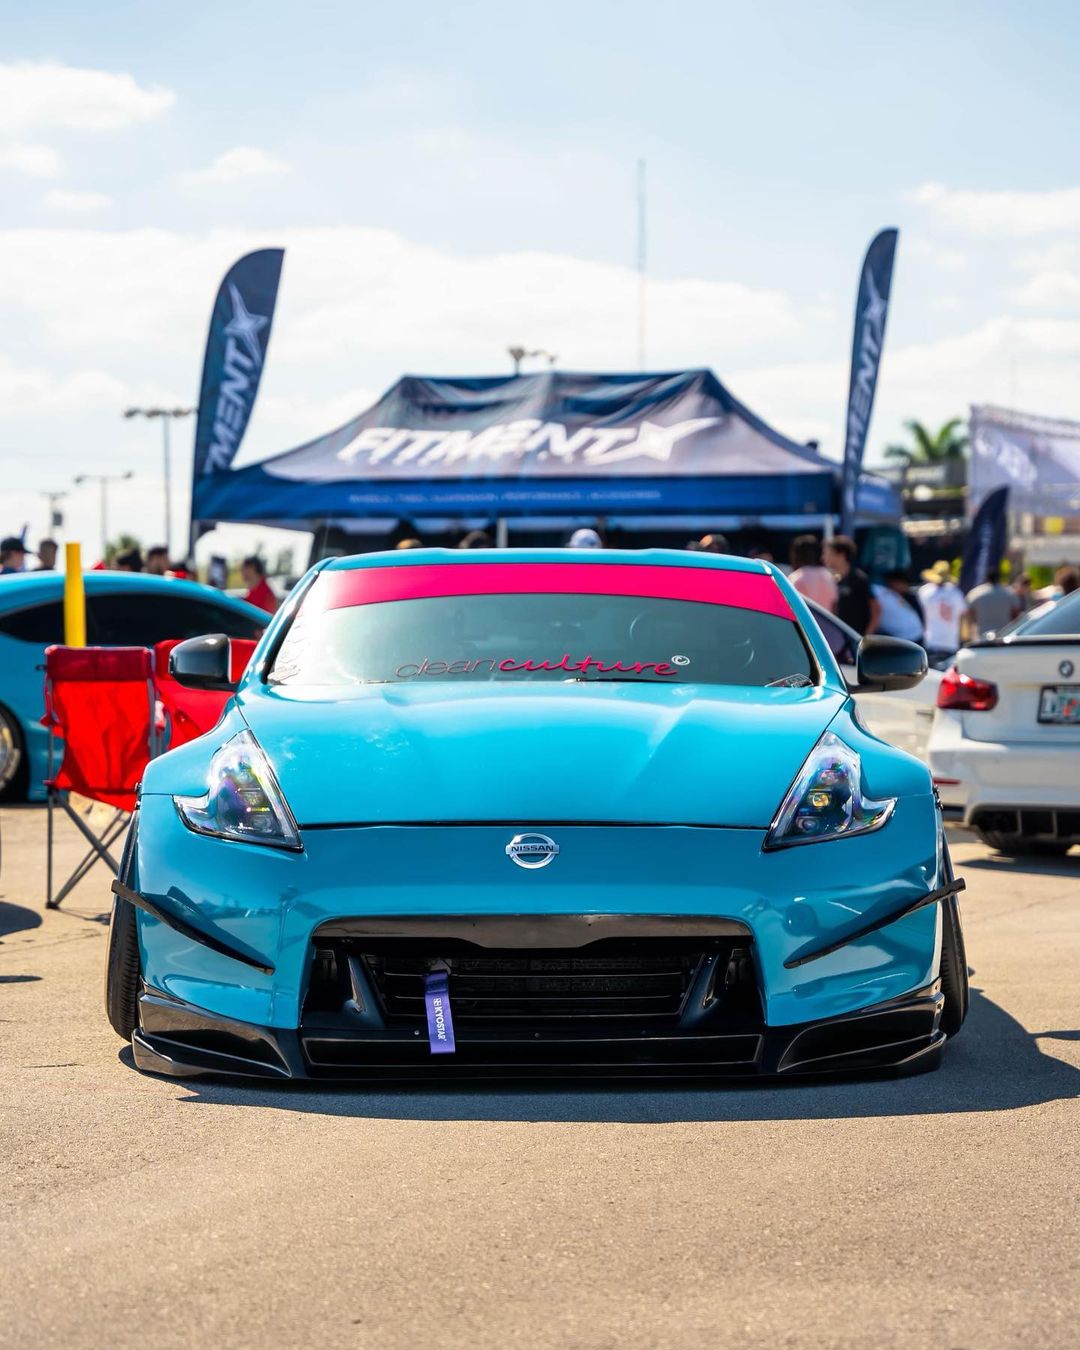 Nissan Lip Kits for the 350z, 370z, and more. We offer a variety of lip kits whether you have an 350z, 370z, etc.